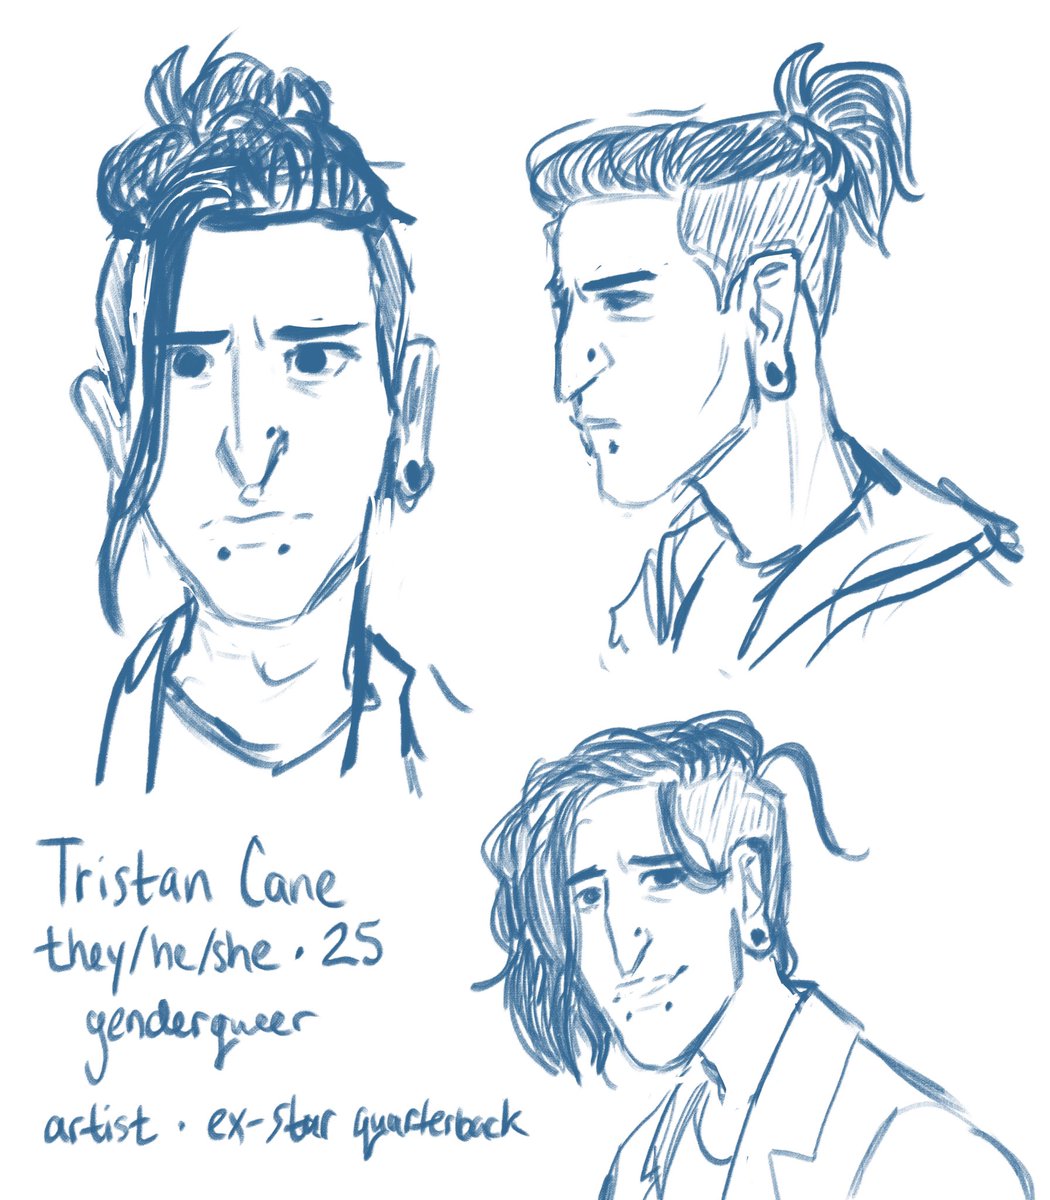 Also here's some more recent sketches of Tristan and Oliver since I still love them :) (from early to mid 2020) 